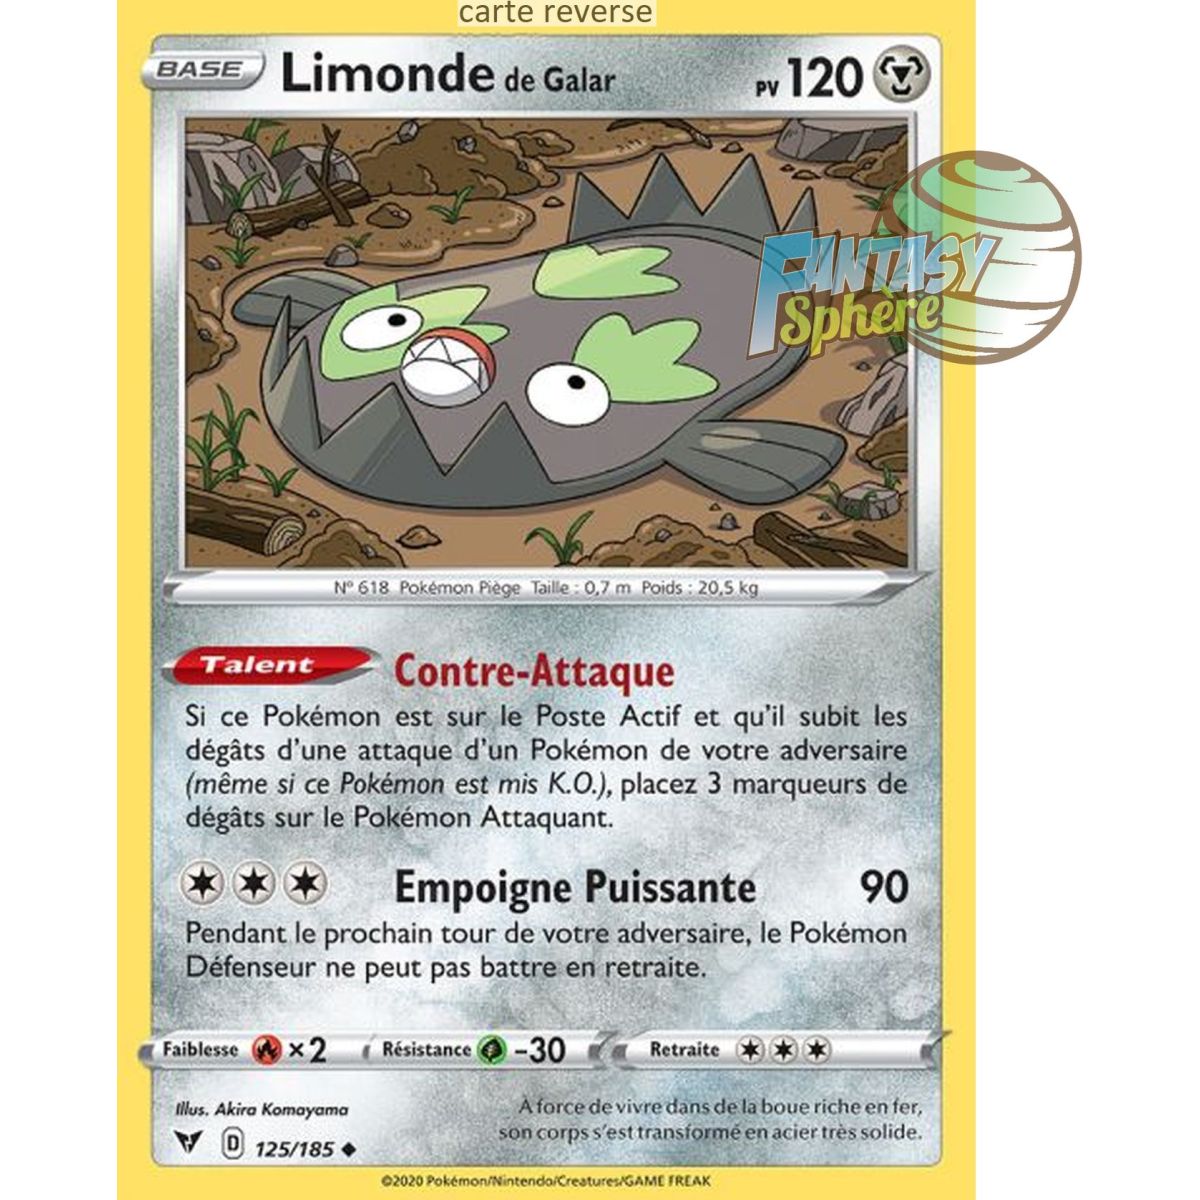 Galarian Lime - Reverse 125/185 - Sword and Shield 4 Brilliant Voltage